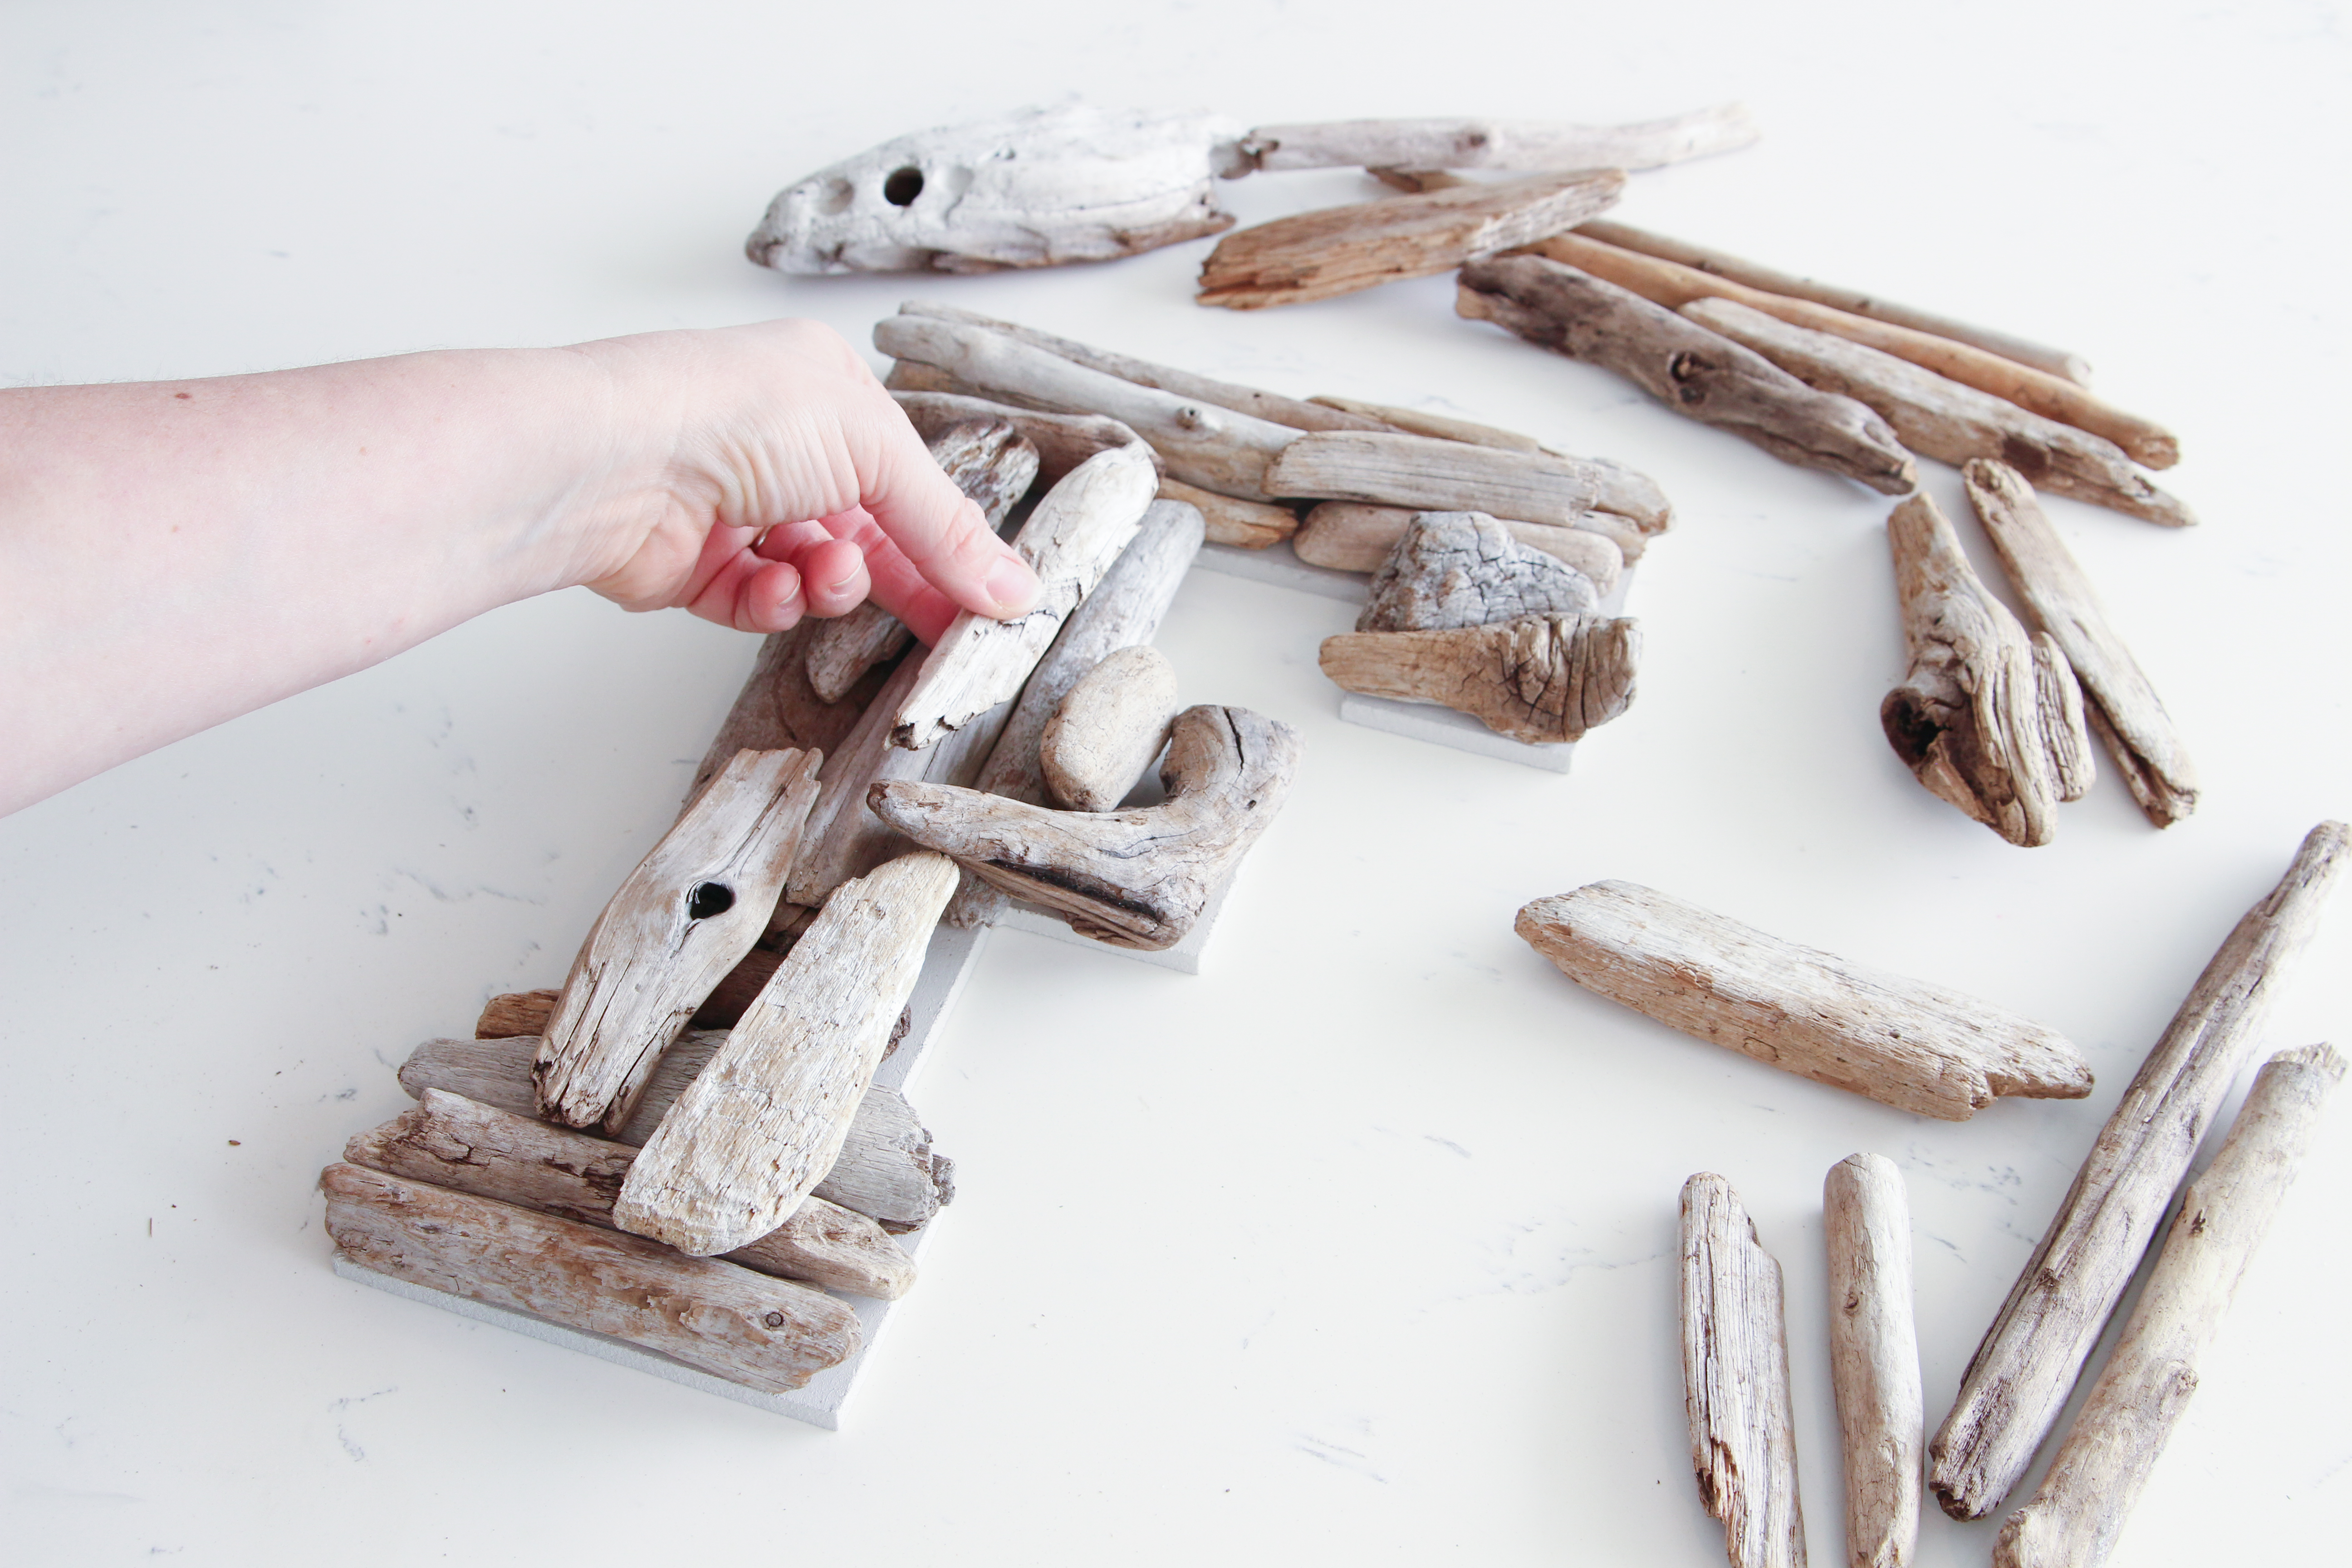 Arranging the pieces of driftwood onto the wooden letter.